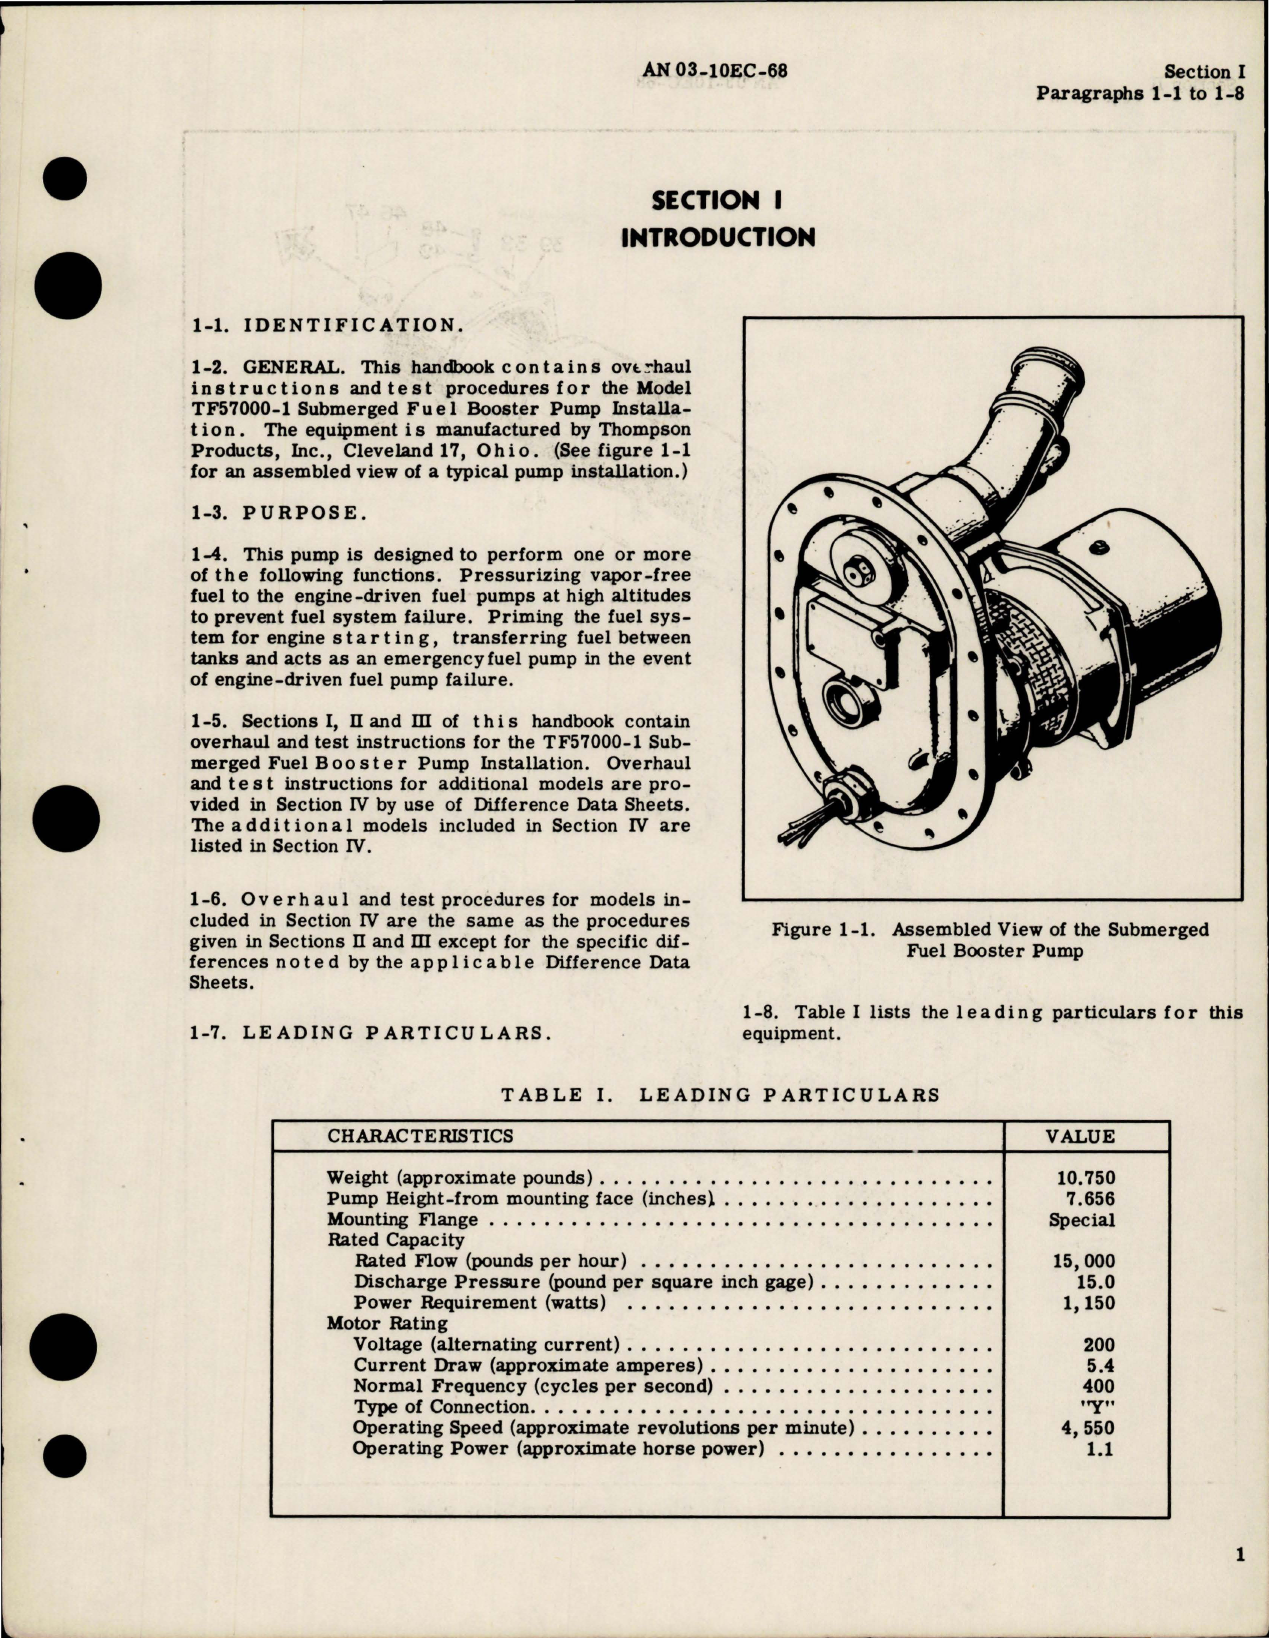 Sample page 5 from AirCorps Library document: Overhaul Instructions for Submerged Fuel Booster Pump - Models TF57000-1, TF59700 and TF59700-1 